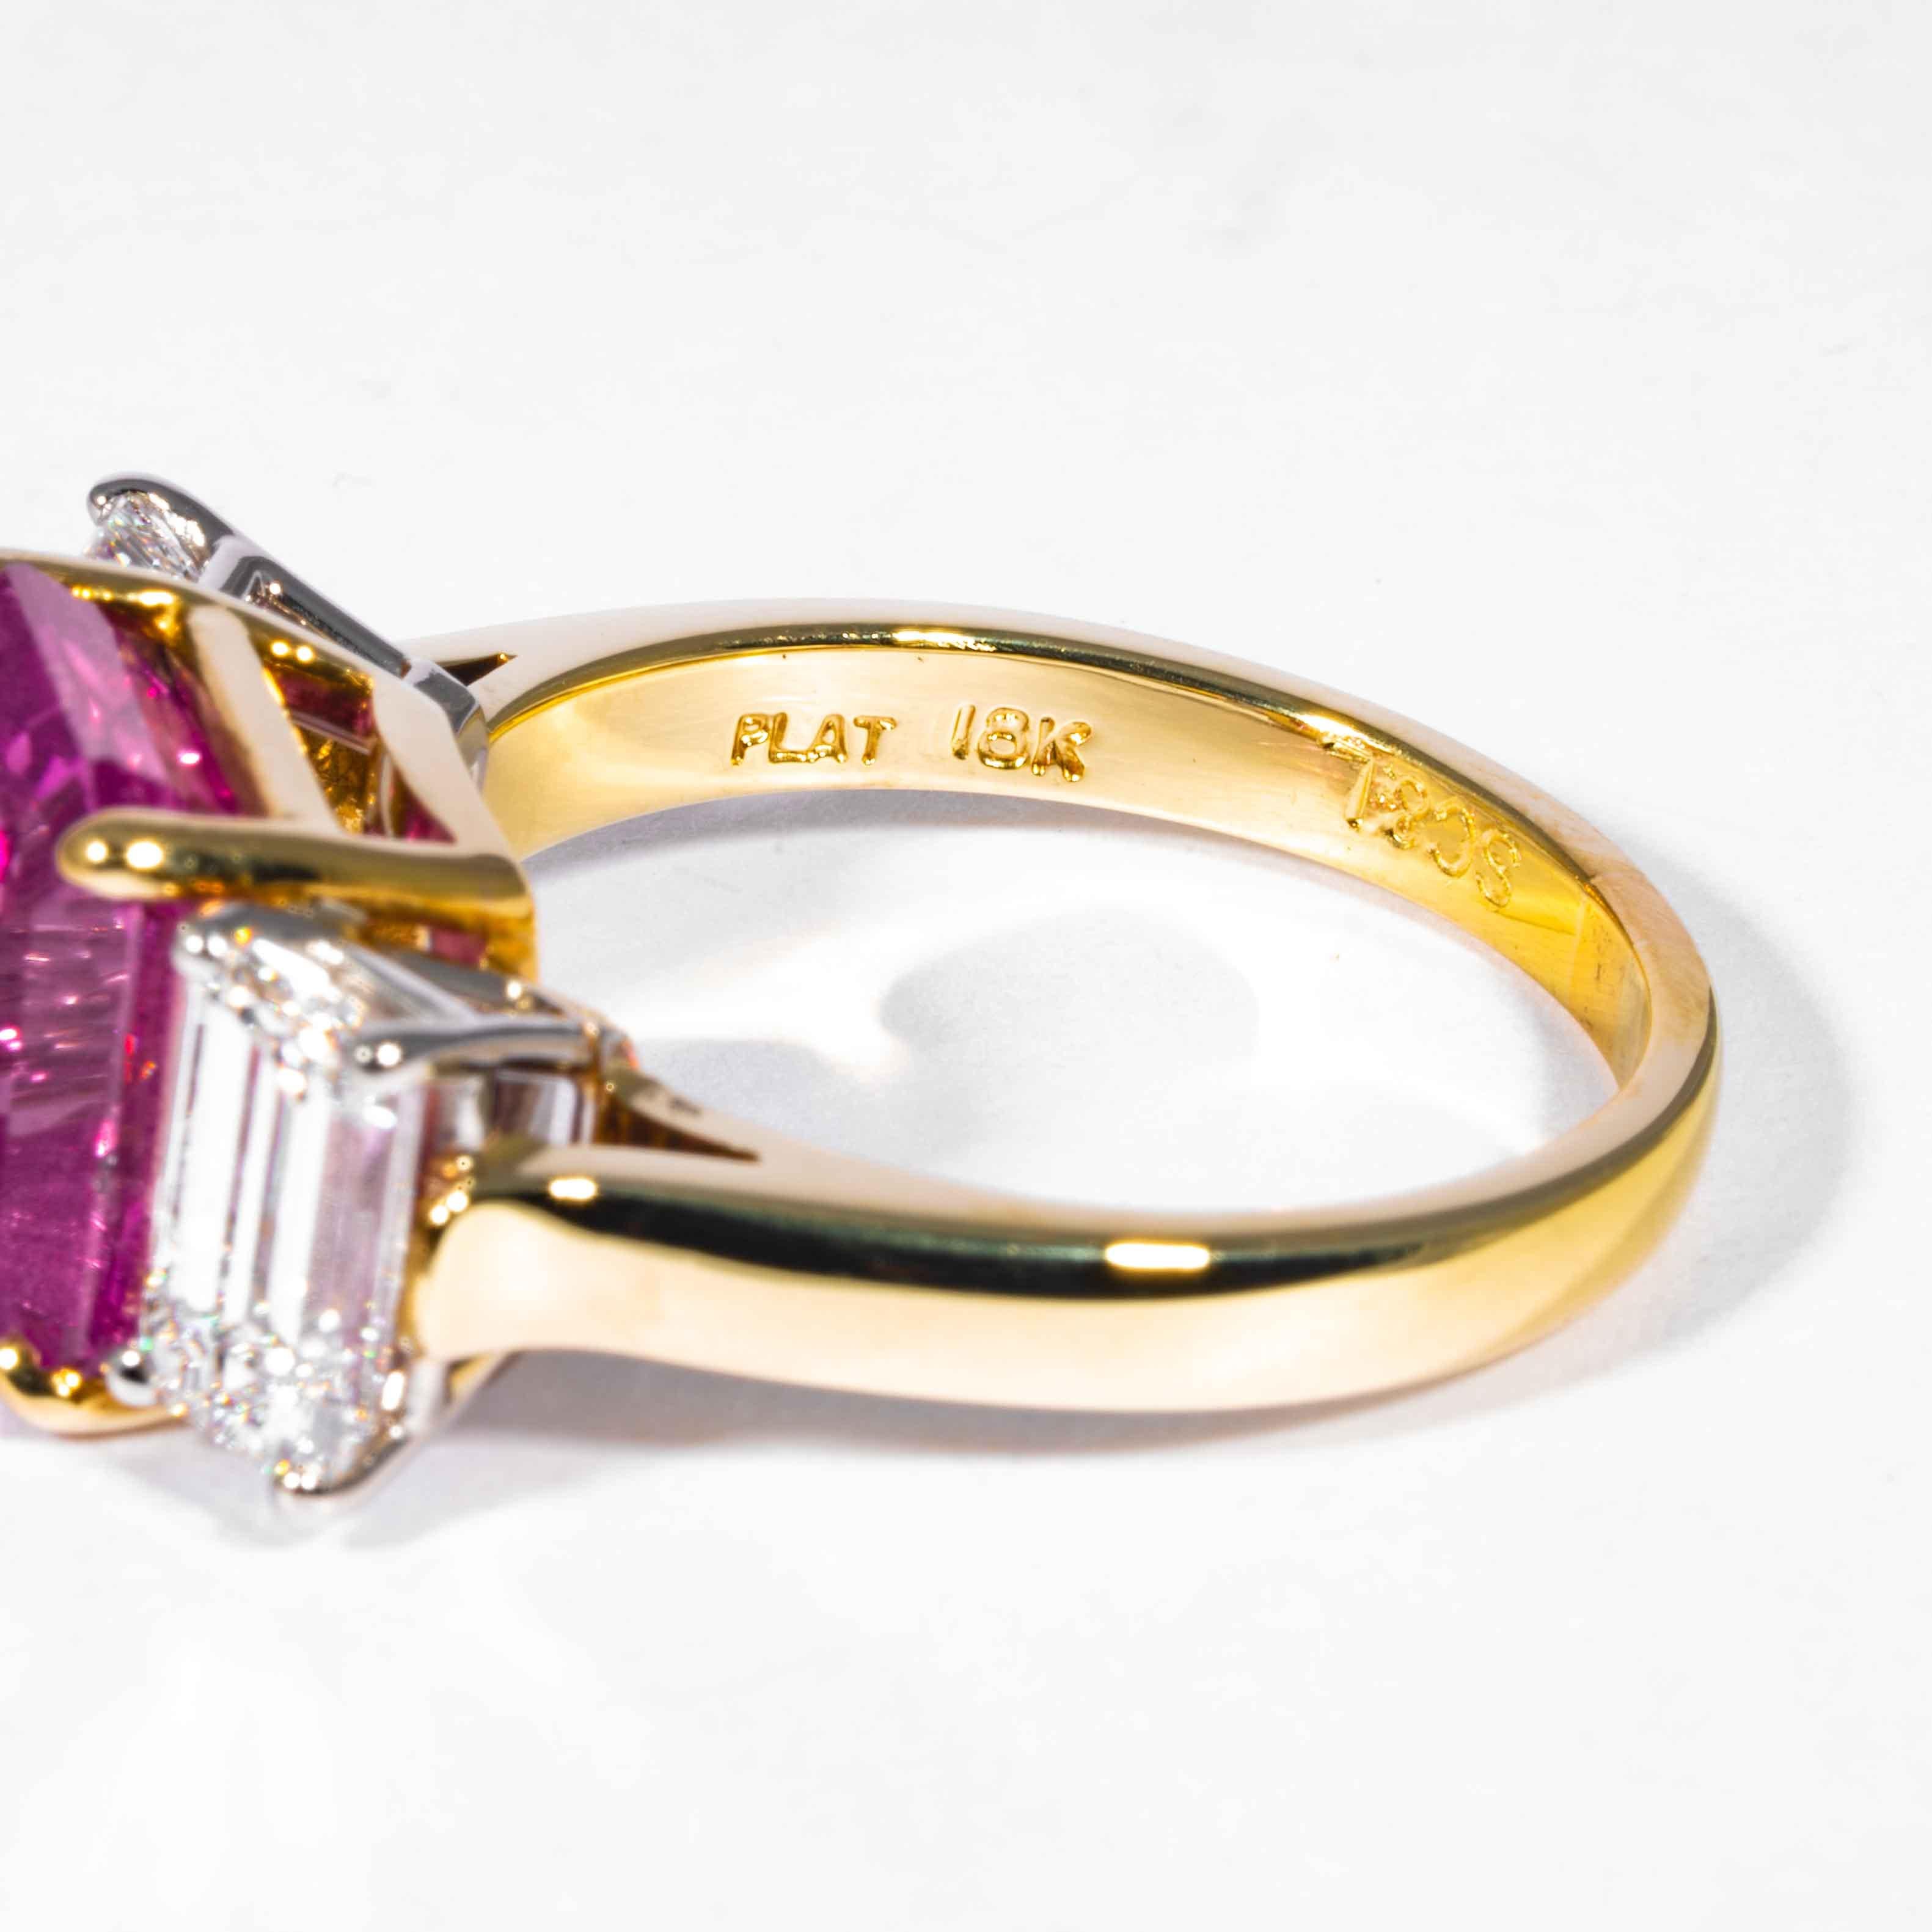 Women's Shreve, Crump & Low 6.13 Carat GIA Certified Pink Sapphire and Diamond Ring